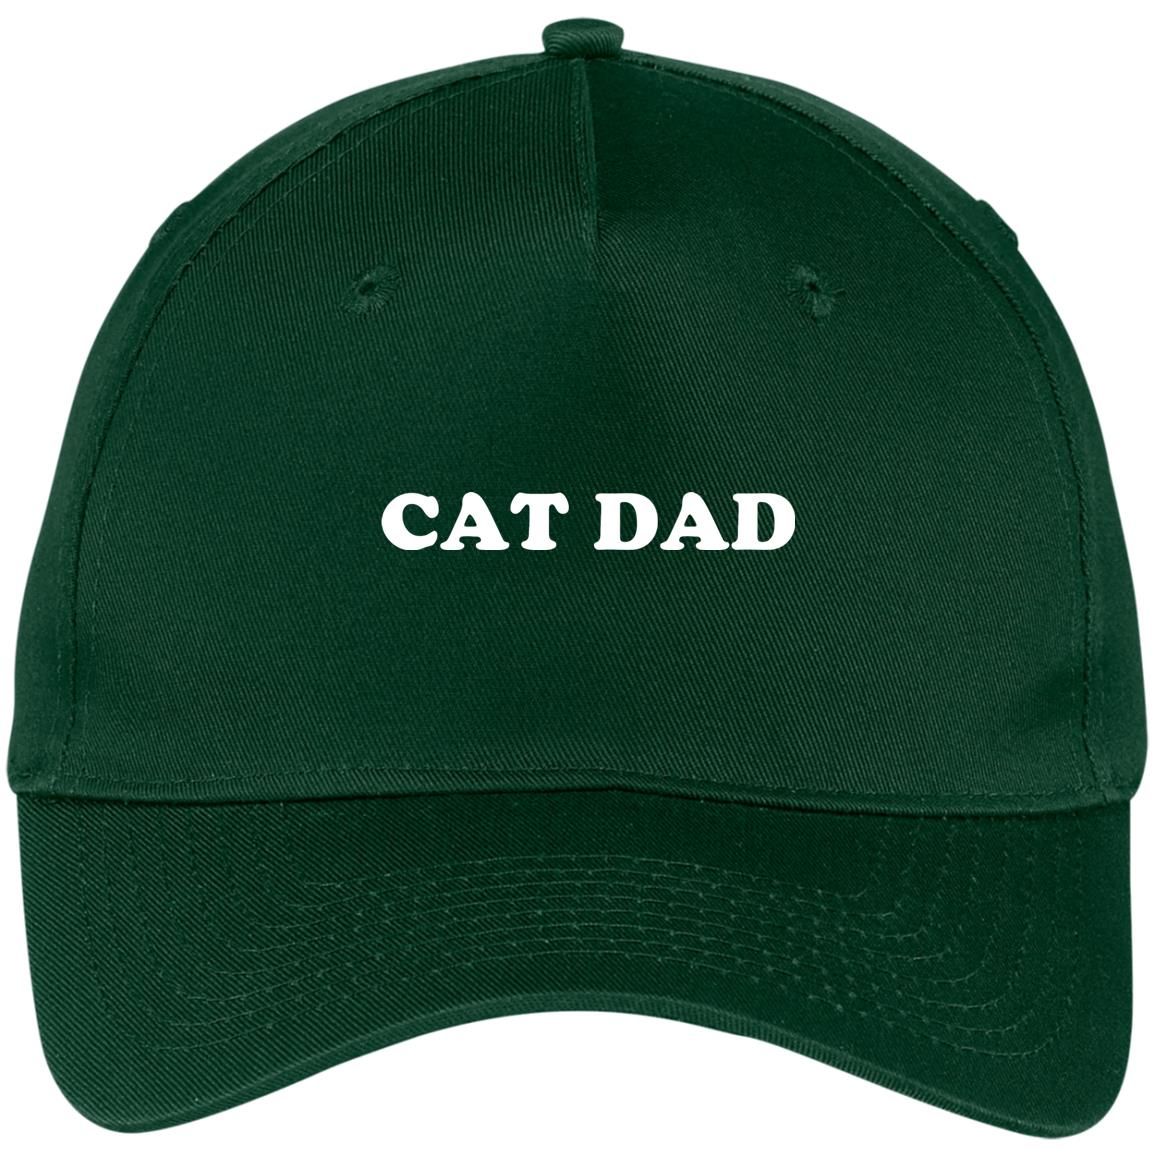 Cat Dad Embroidered Hat Style: CP86 Five Panel Twill Cap, Color: Hunter